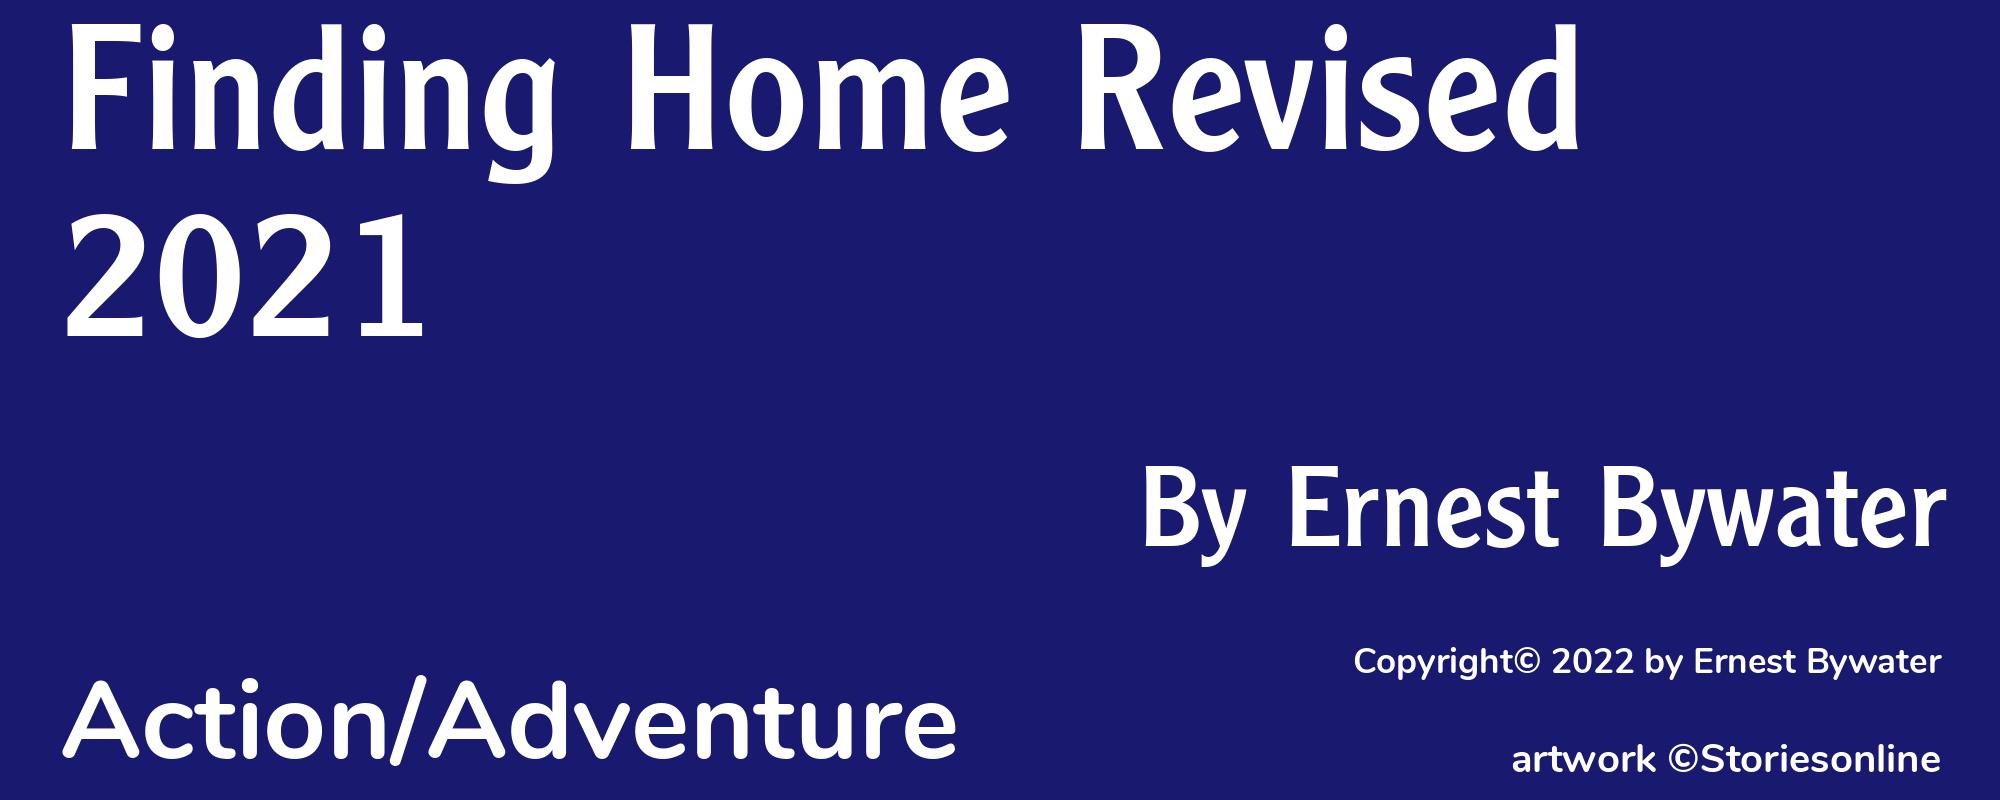 Finding Home Revised 2021 - Cover